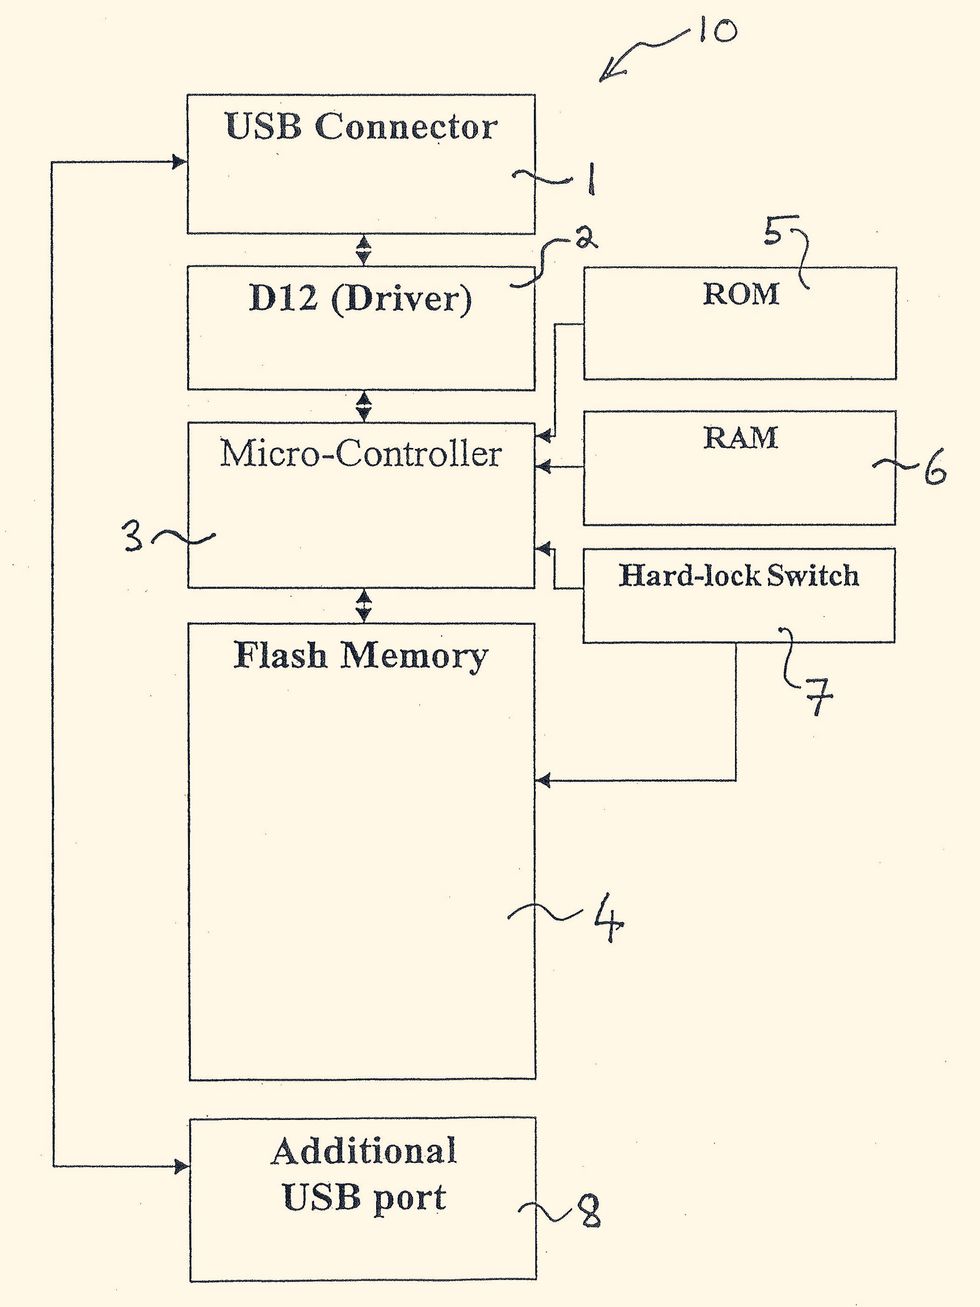 a block diagram with the words USB Connector, D12 (Driver), Micro-Controller, Flash Memory, Additional USB port, ROM, RAM, and Hard-lock Switch appearing in individual rectangles